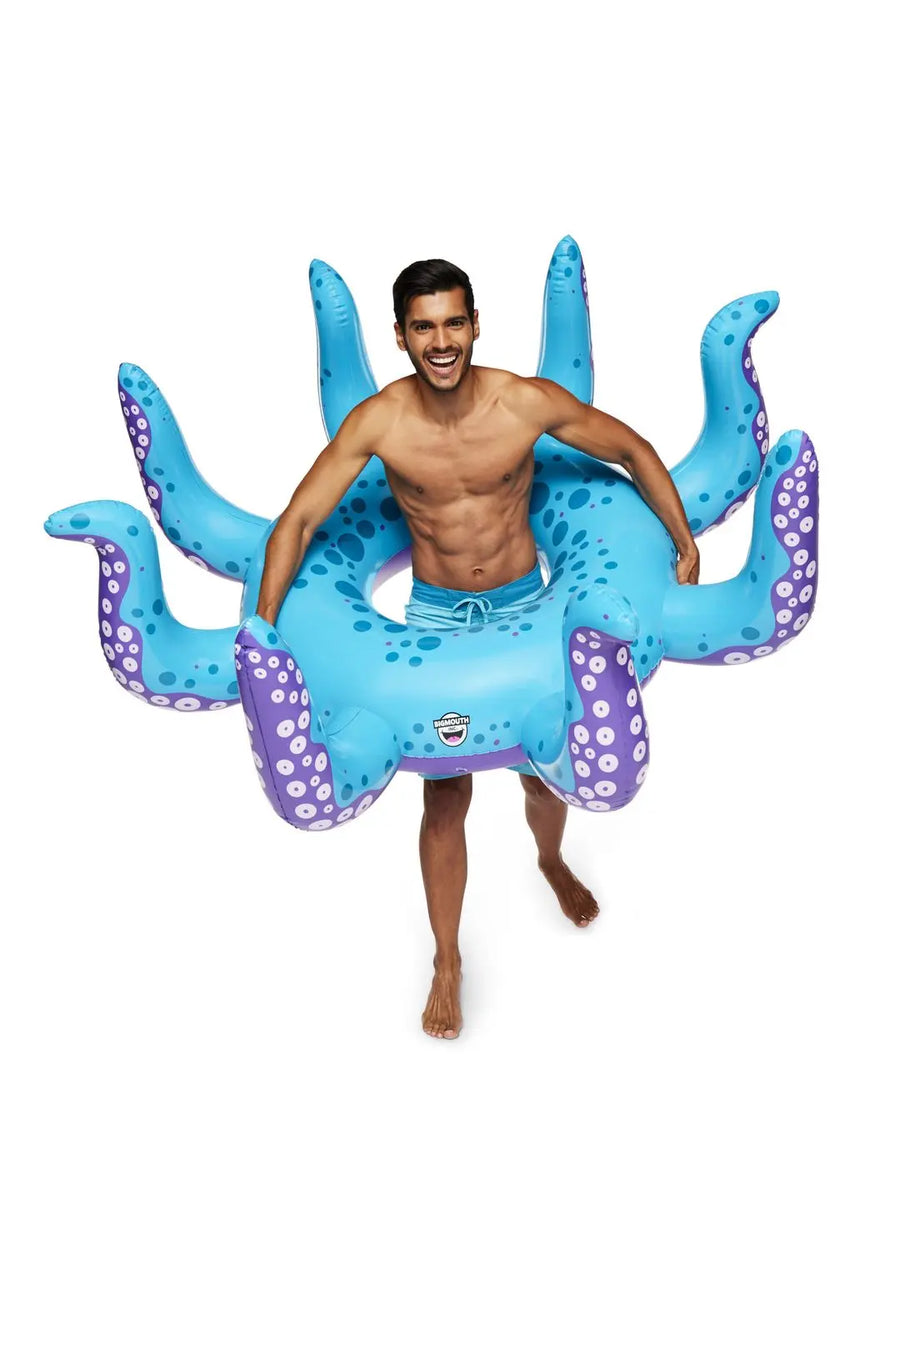 Giant Octopus Pool Float 22 Big Mouth